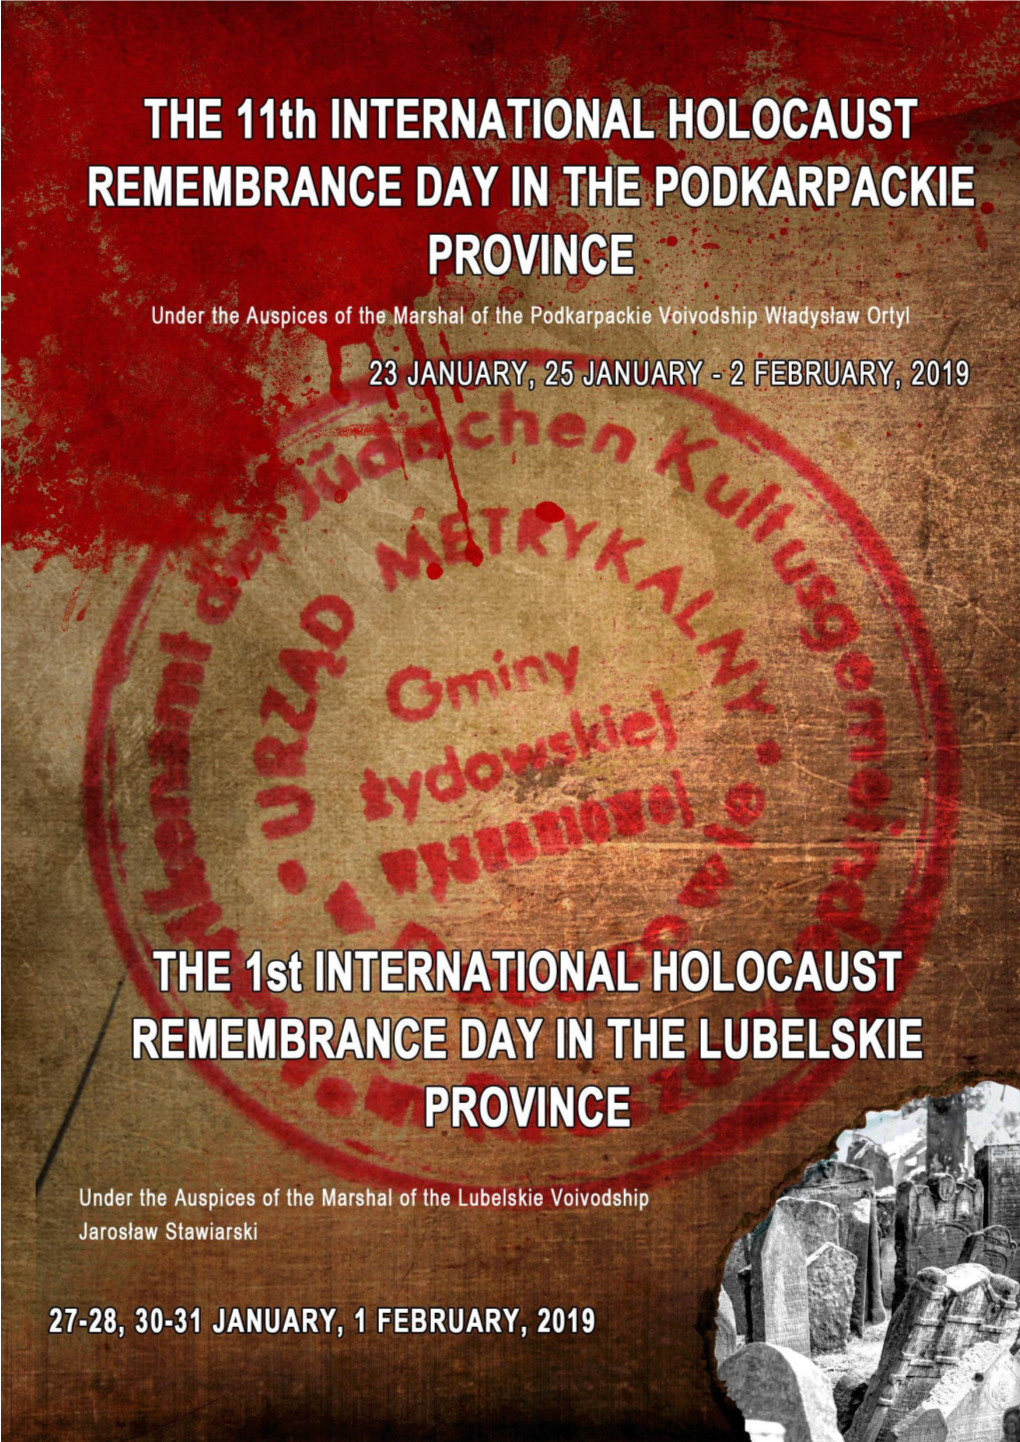 THE 11Th INTERNATIONAL HOLOCAUST REMEMBRANCE DAYS in the PODKARPACKIE VOIVODESHIP